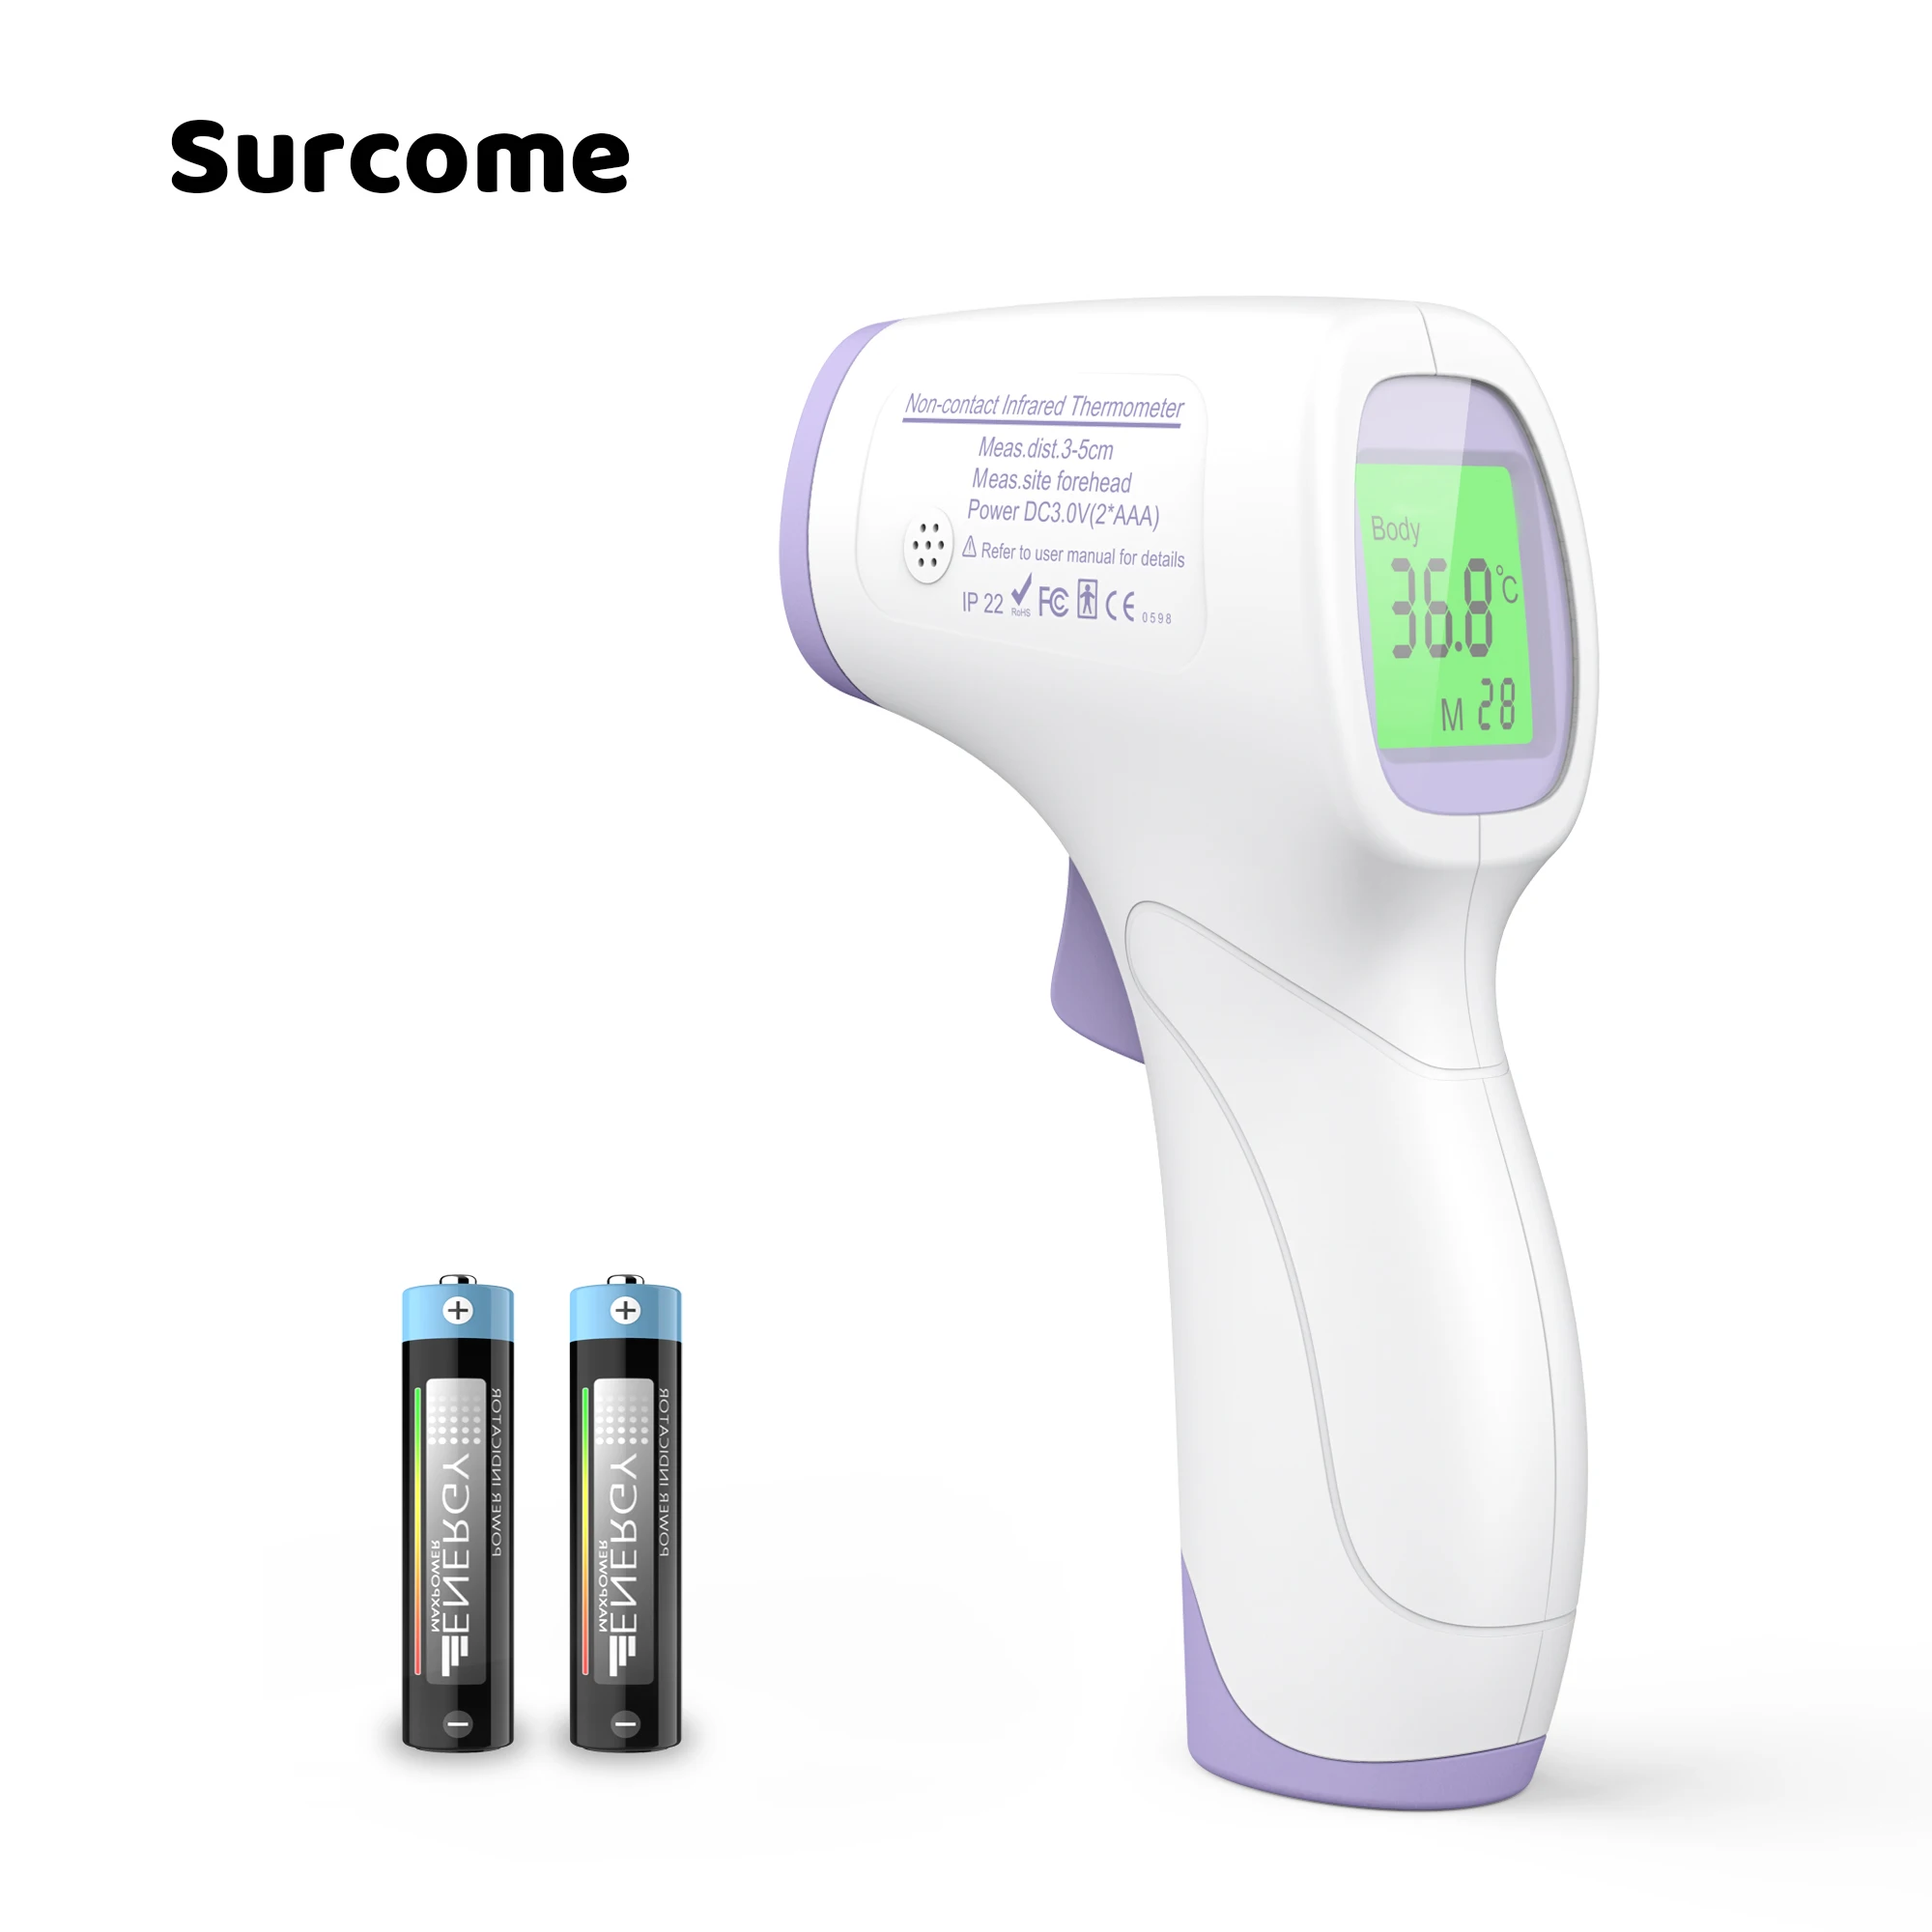 Ir non-contact infrared digital thermo thermometer